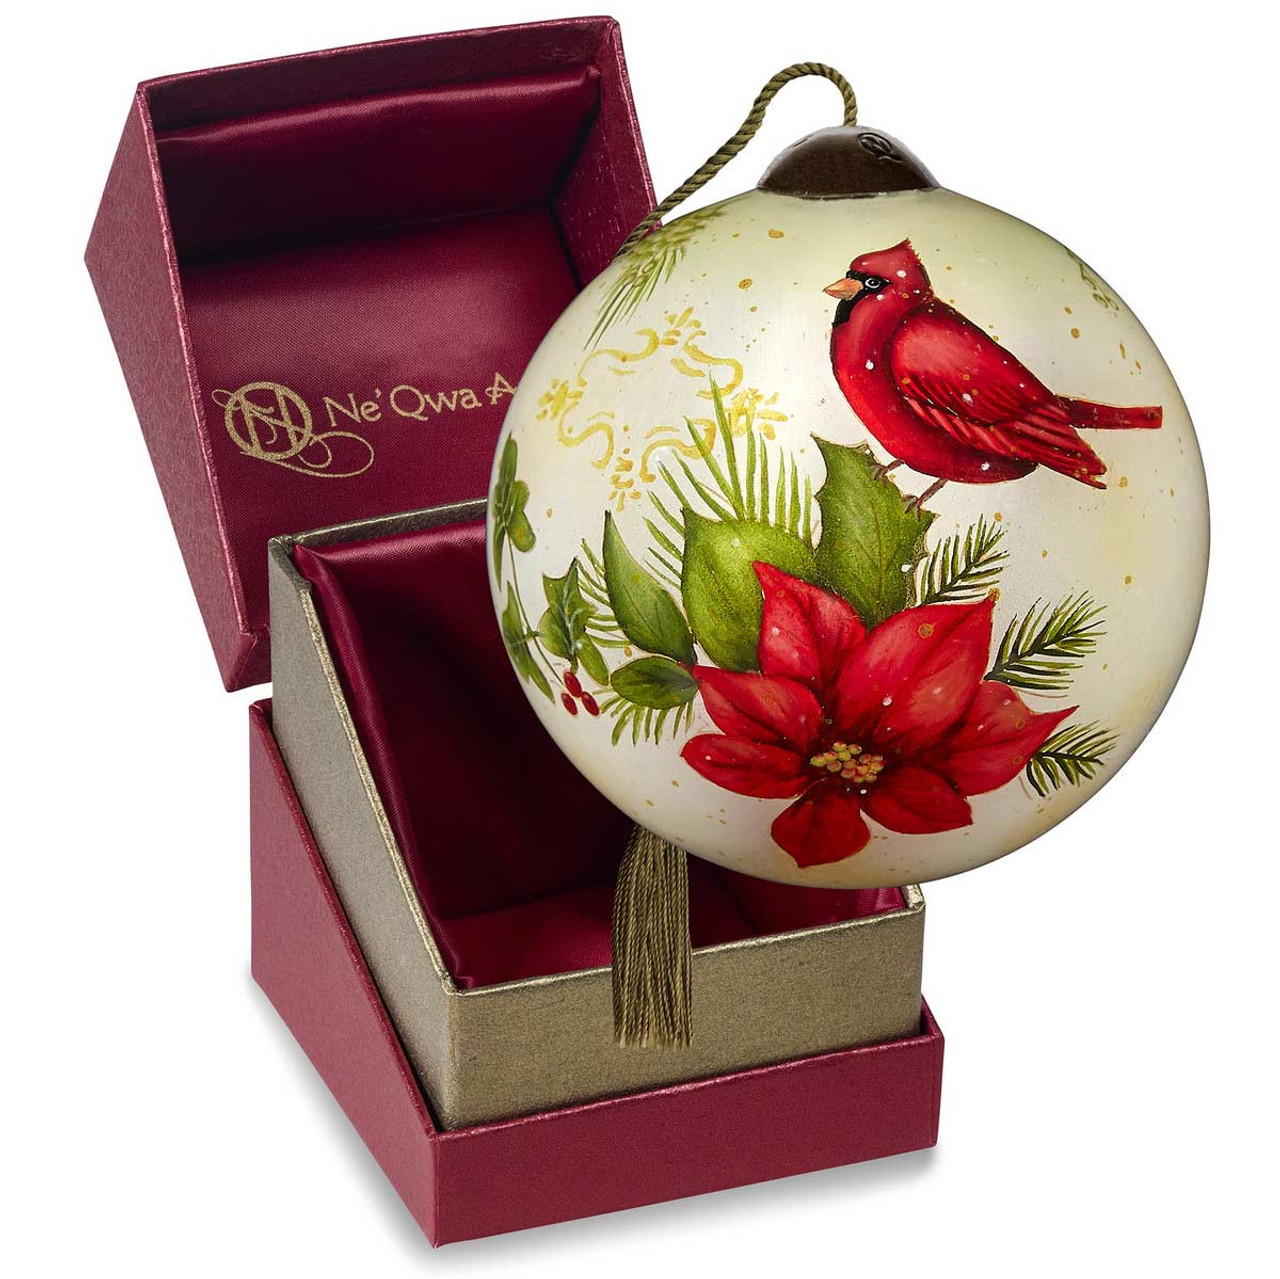 Jokari Premium Protection For Your Precious Ornaments, Perfect For  Year-round Decorating : Target